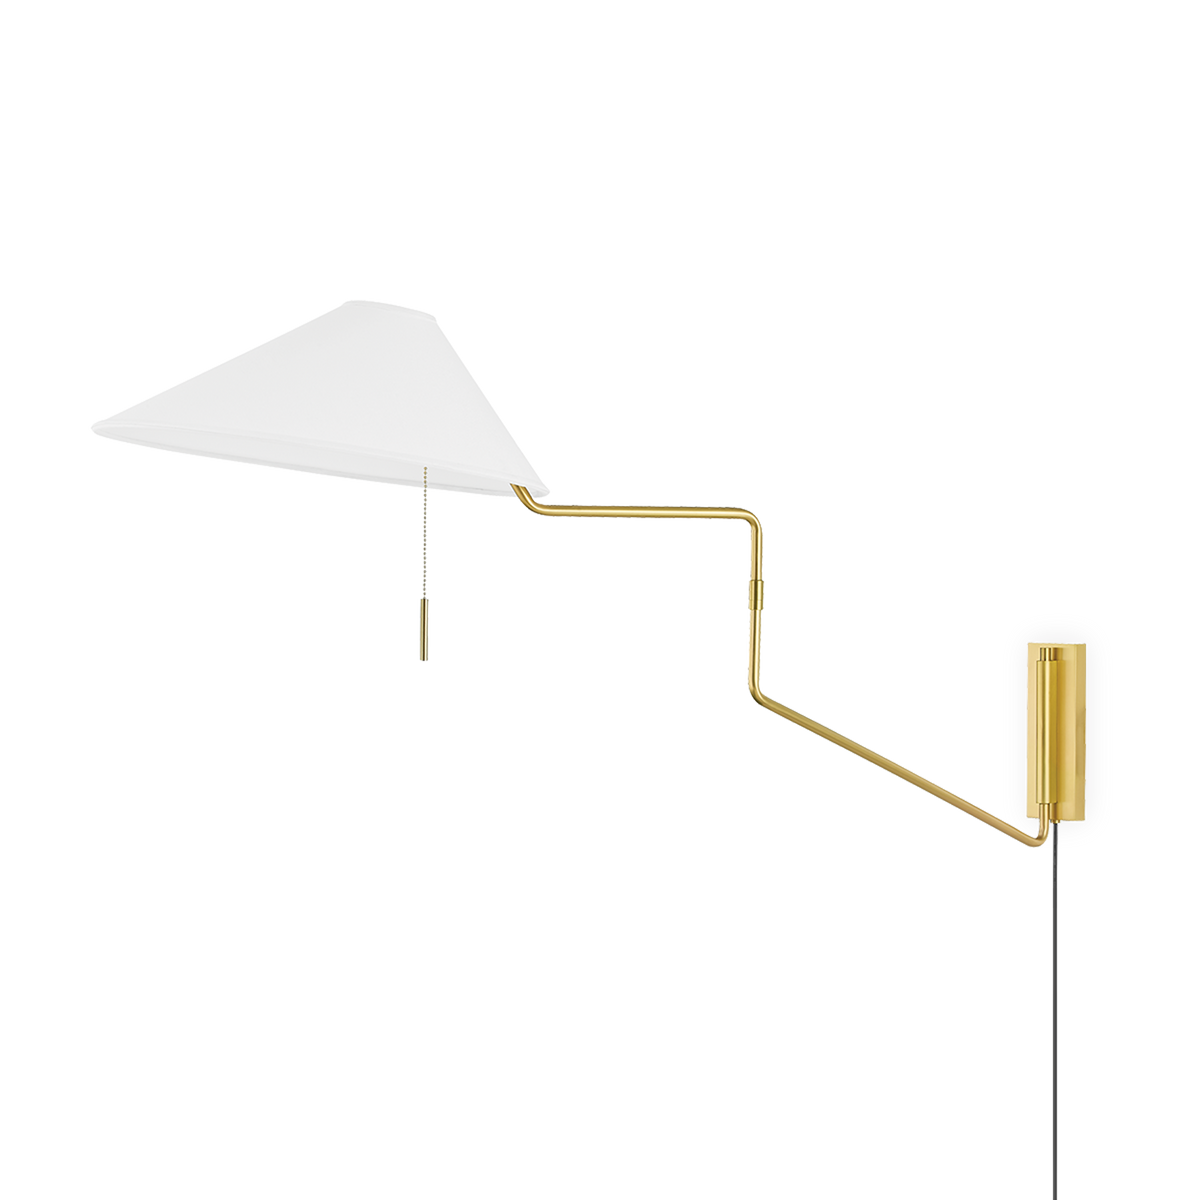 The Aisa Wall Light is a classic mid-century style lihjy made modern.